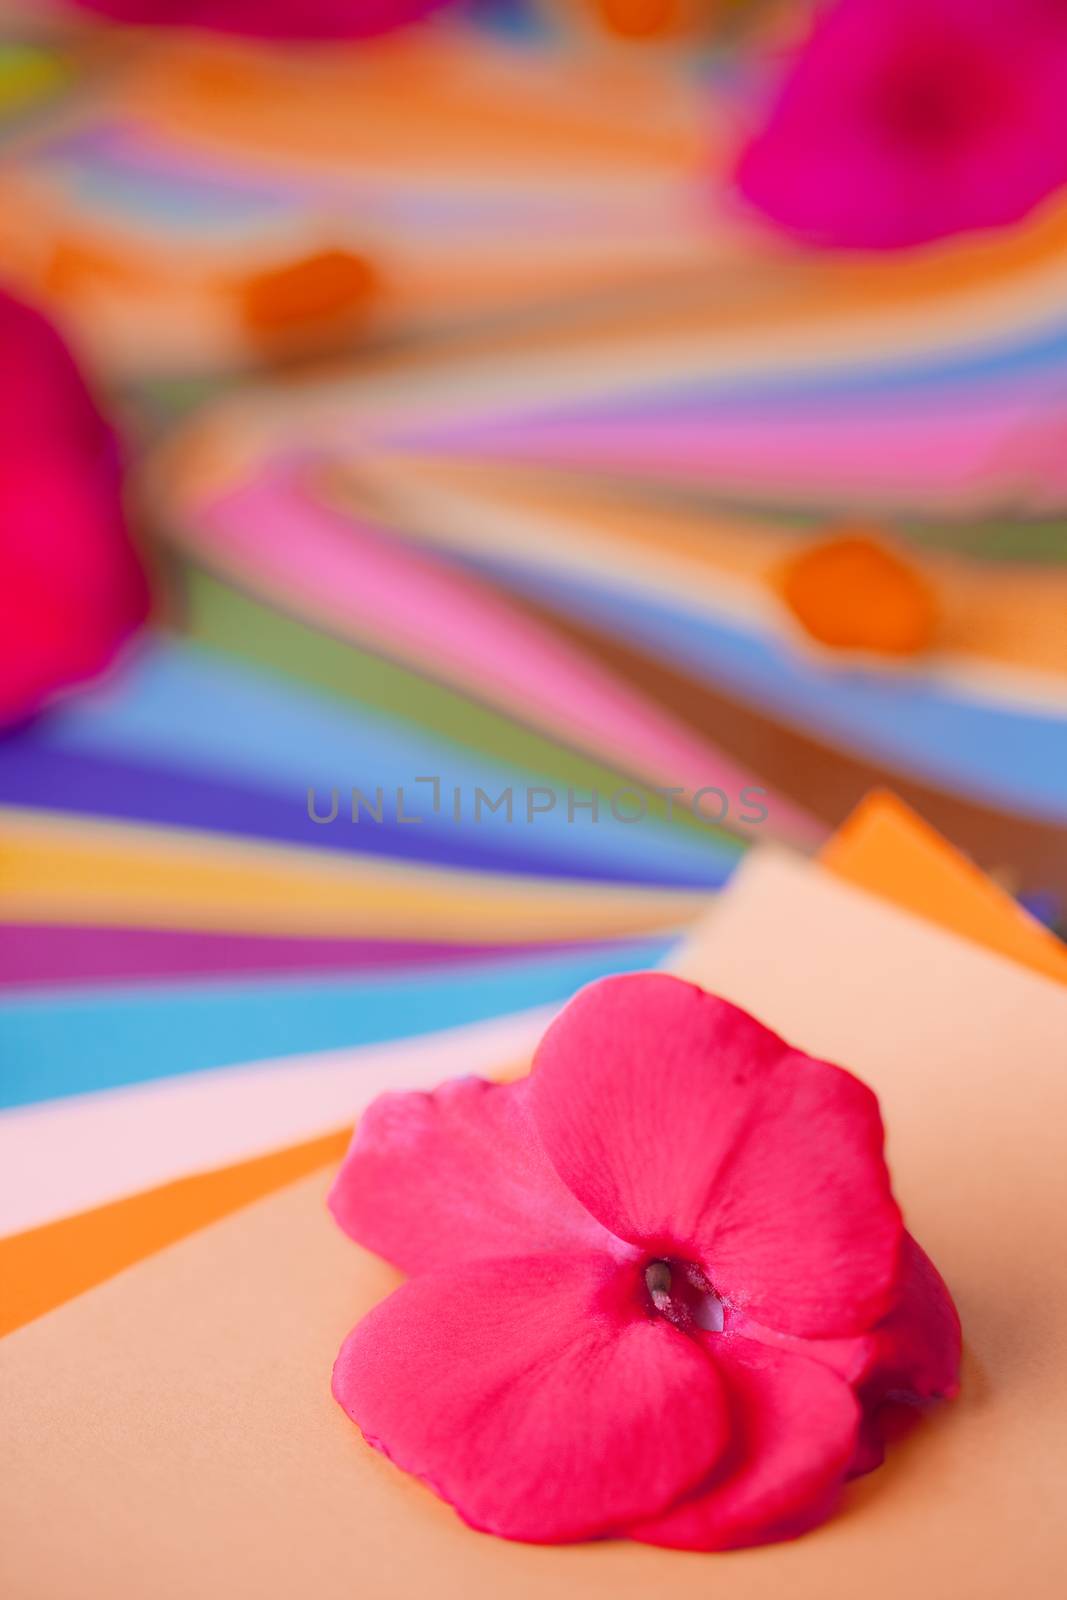 Red and pink flowers on  colorful papers